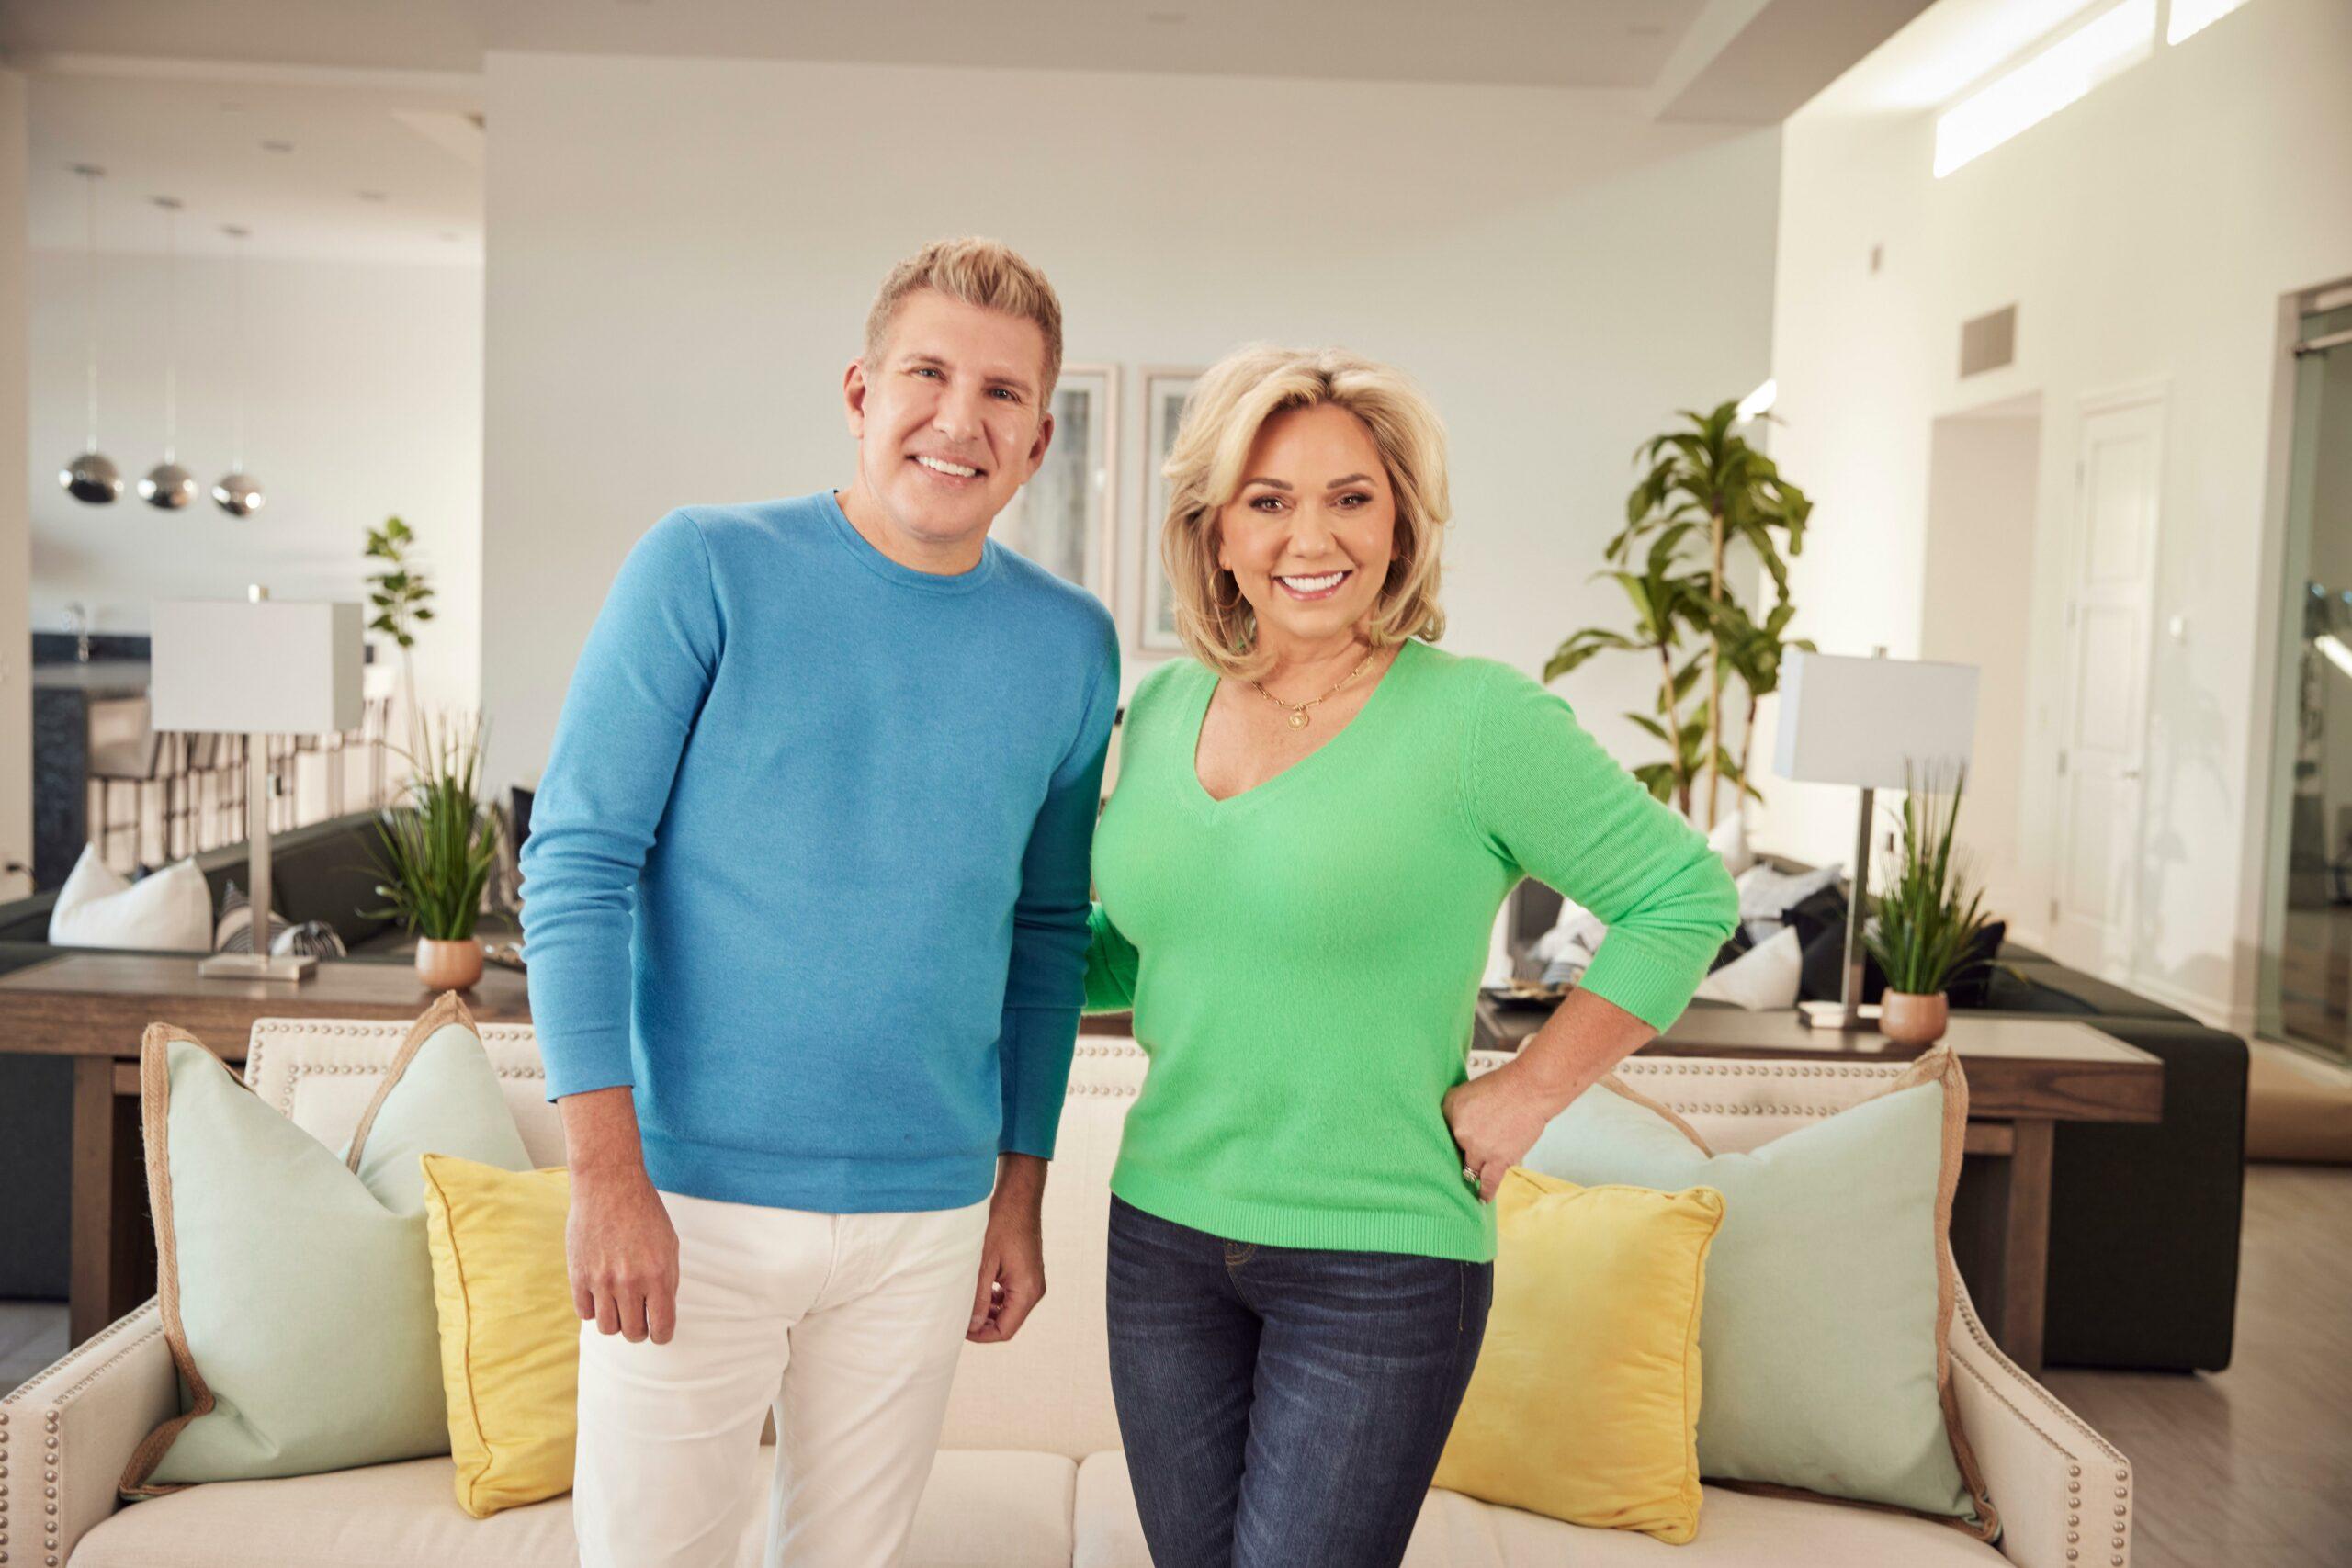 Todd & Julie Chrisley show off their collective 40lbs weight loss in new Nutrisystem photoshoot